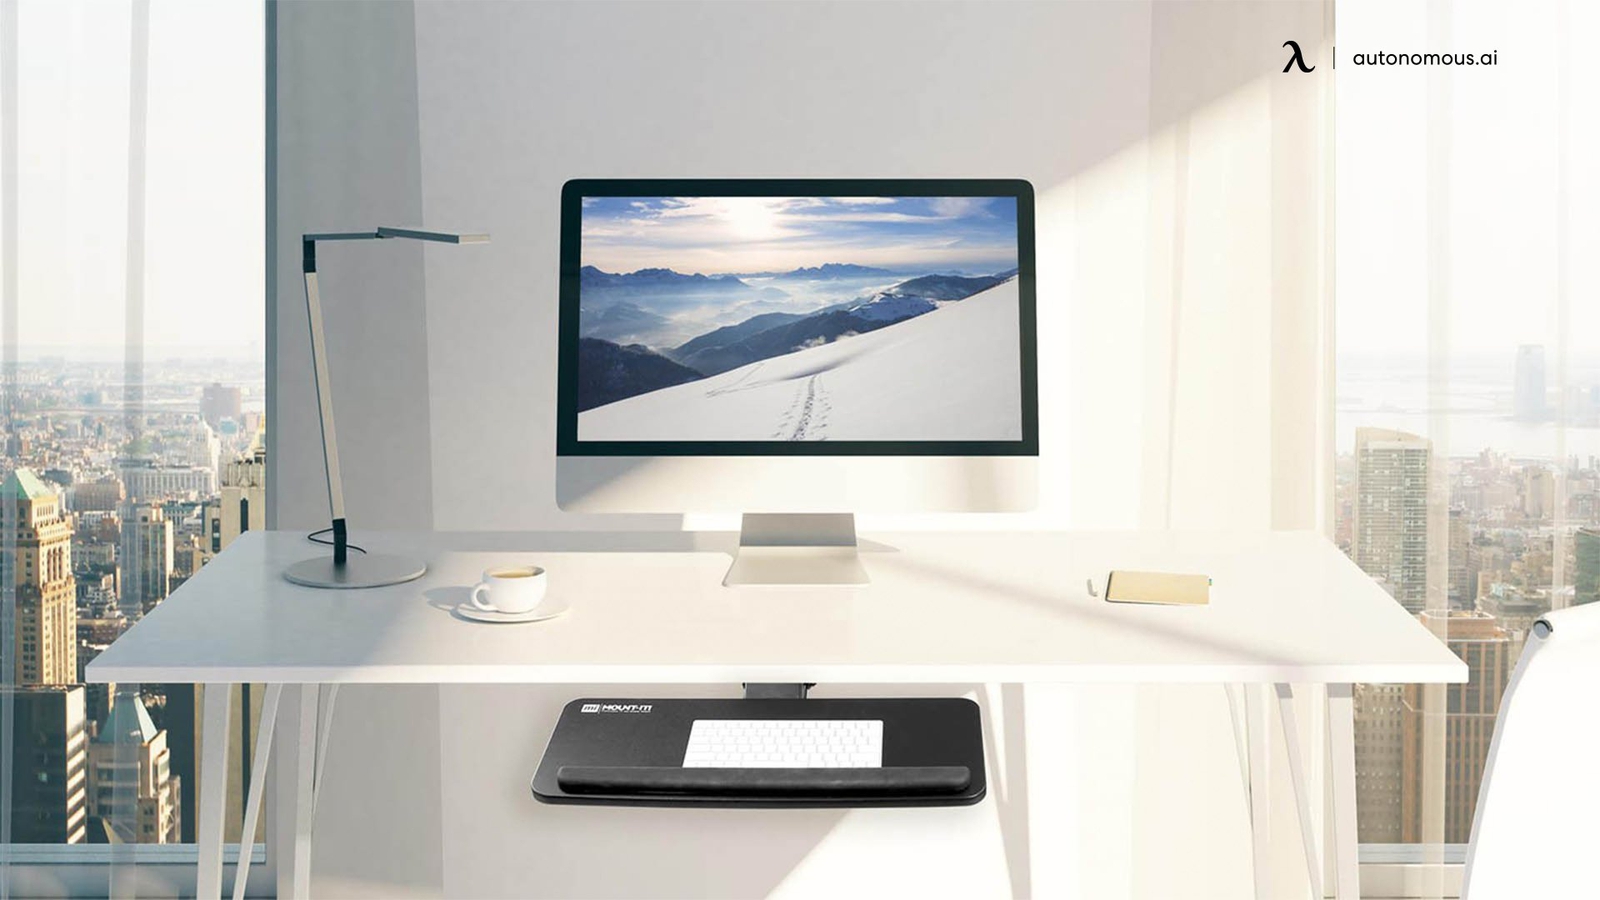 Top 3 Keyboard & Mouse Trays for Desk Mount-It!, 3M & more